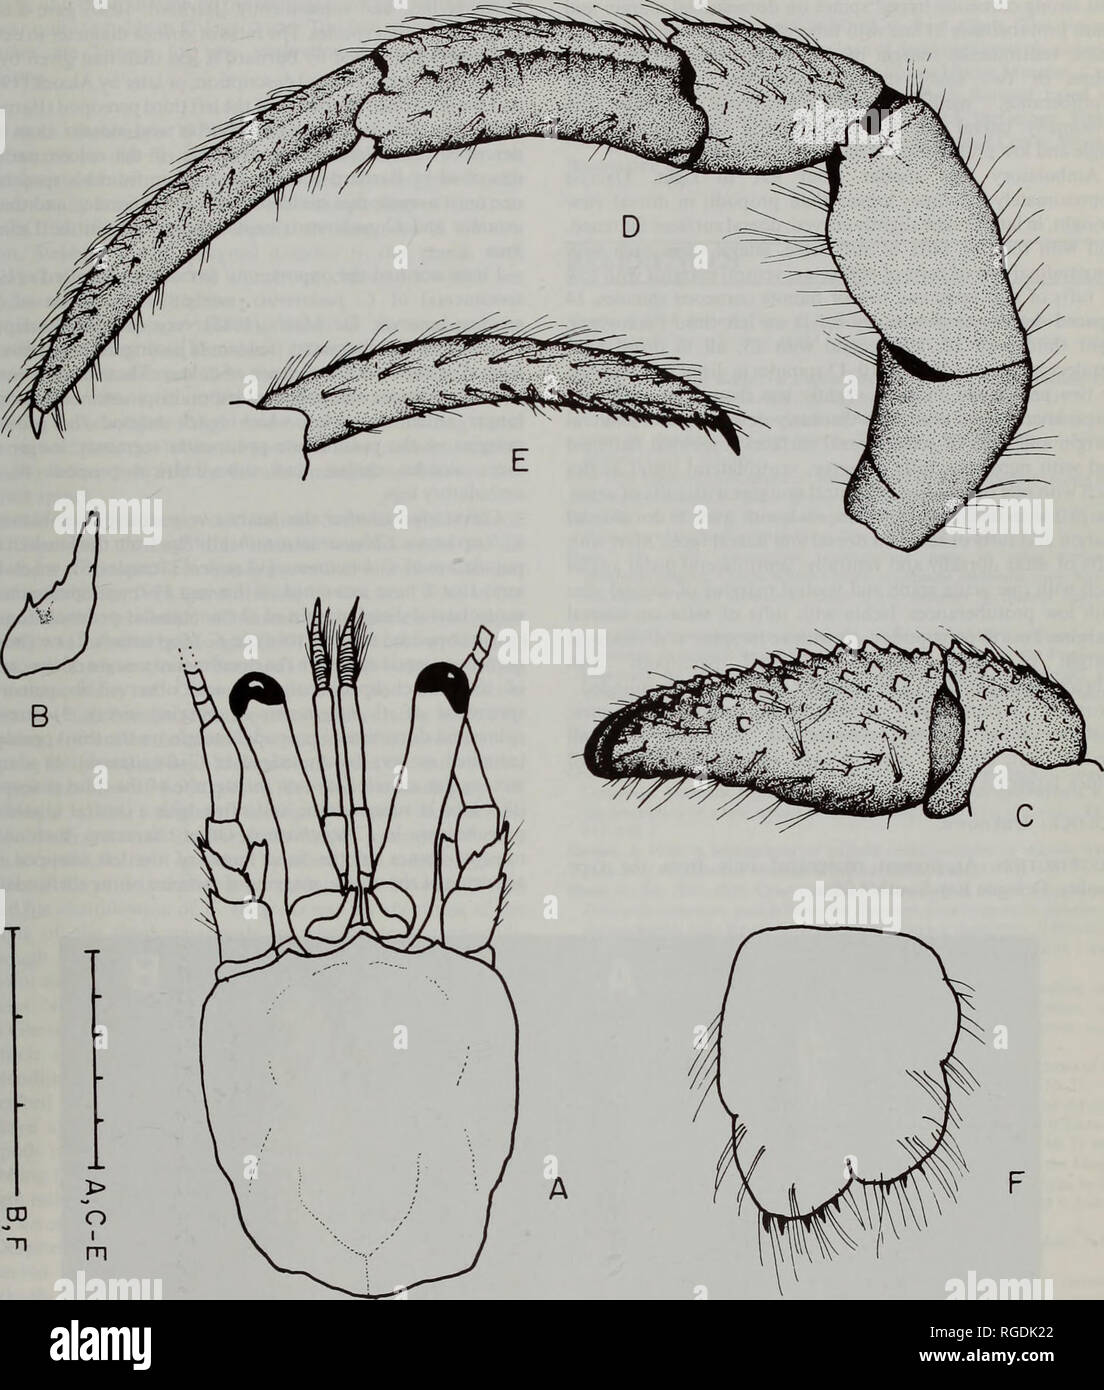 . Bulletin of the Natural History Museum Zoology. REASSESSMENT OF CALCINUS' ASTATHES 33. Fig. 1 Clibanarius astathes (Stebbing, 1924), A-E, female lectotype (7.3 mm); F, male paralectotype (6.9 mm). A, shield and cephalic appendages; B, right second antennal peduncular segment enlarged; C, carpus and chela of left cheliped (lateral view); D, third left pereopod (lateral view); E, dac- tyl of third left pereopod (mesial view); F, telson. Scales equal 5.0 mm (A, C-E) and 3.0 mm (B, F).. Please note that these images are extracted from scanned page images that may have been digitally enhanced for Stock Photo